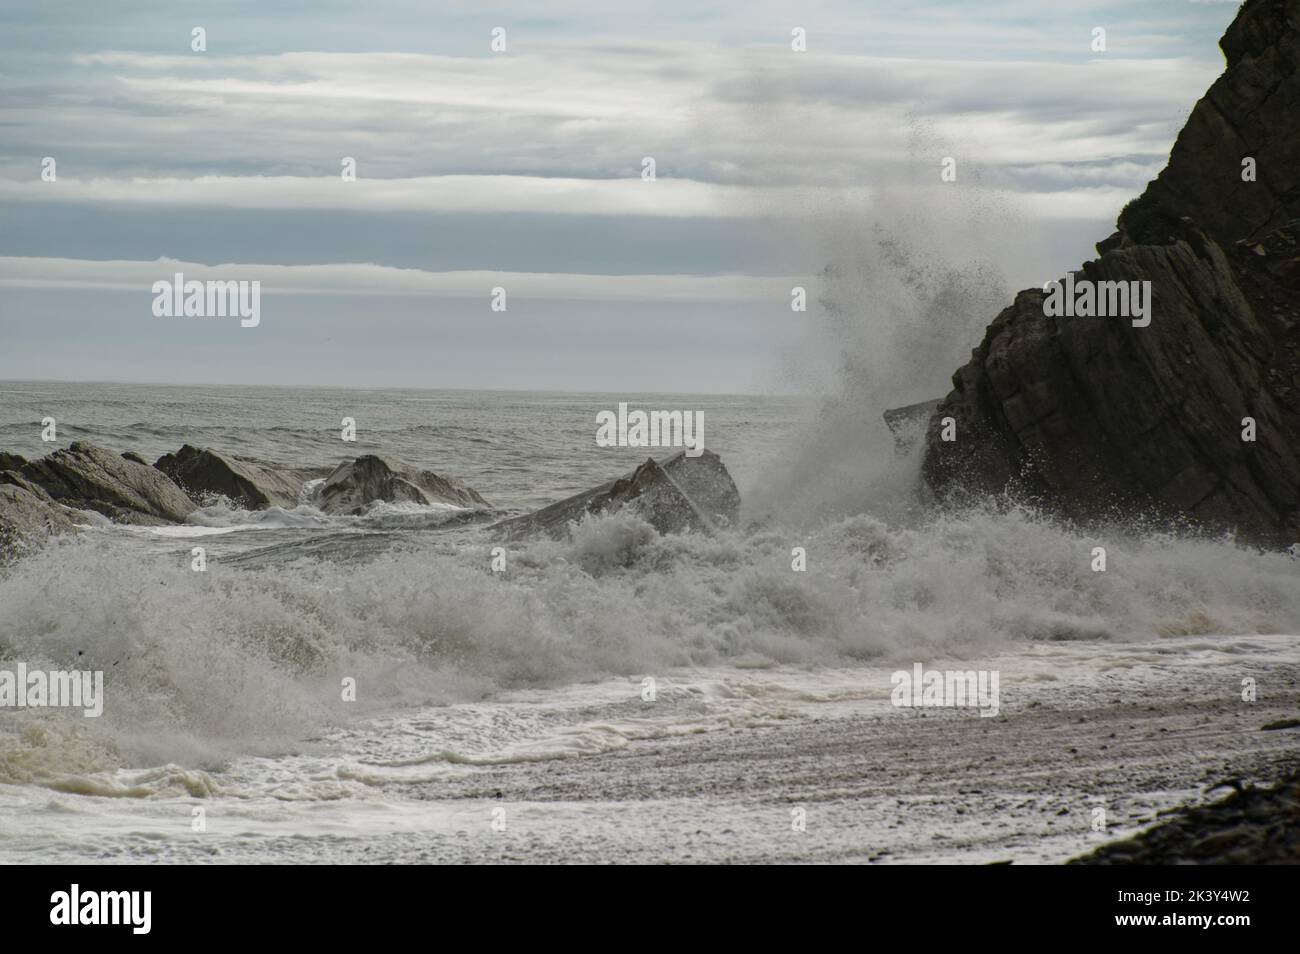 A stony beach has a rocky end with waves crashing against it Stock Photo